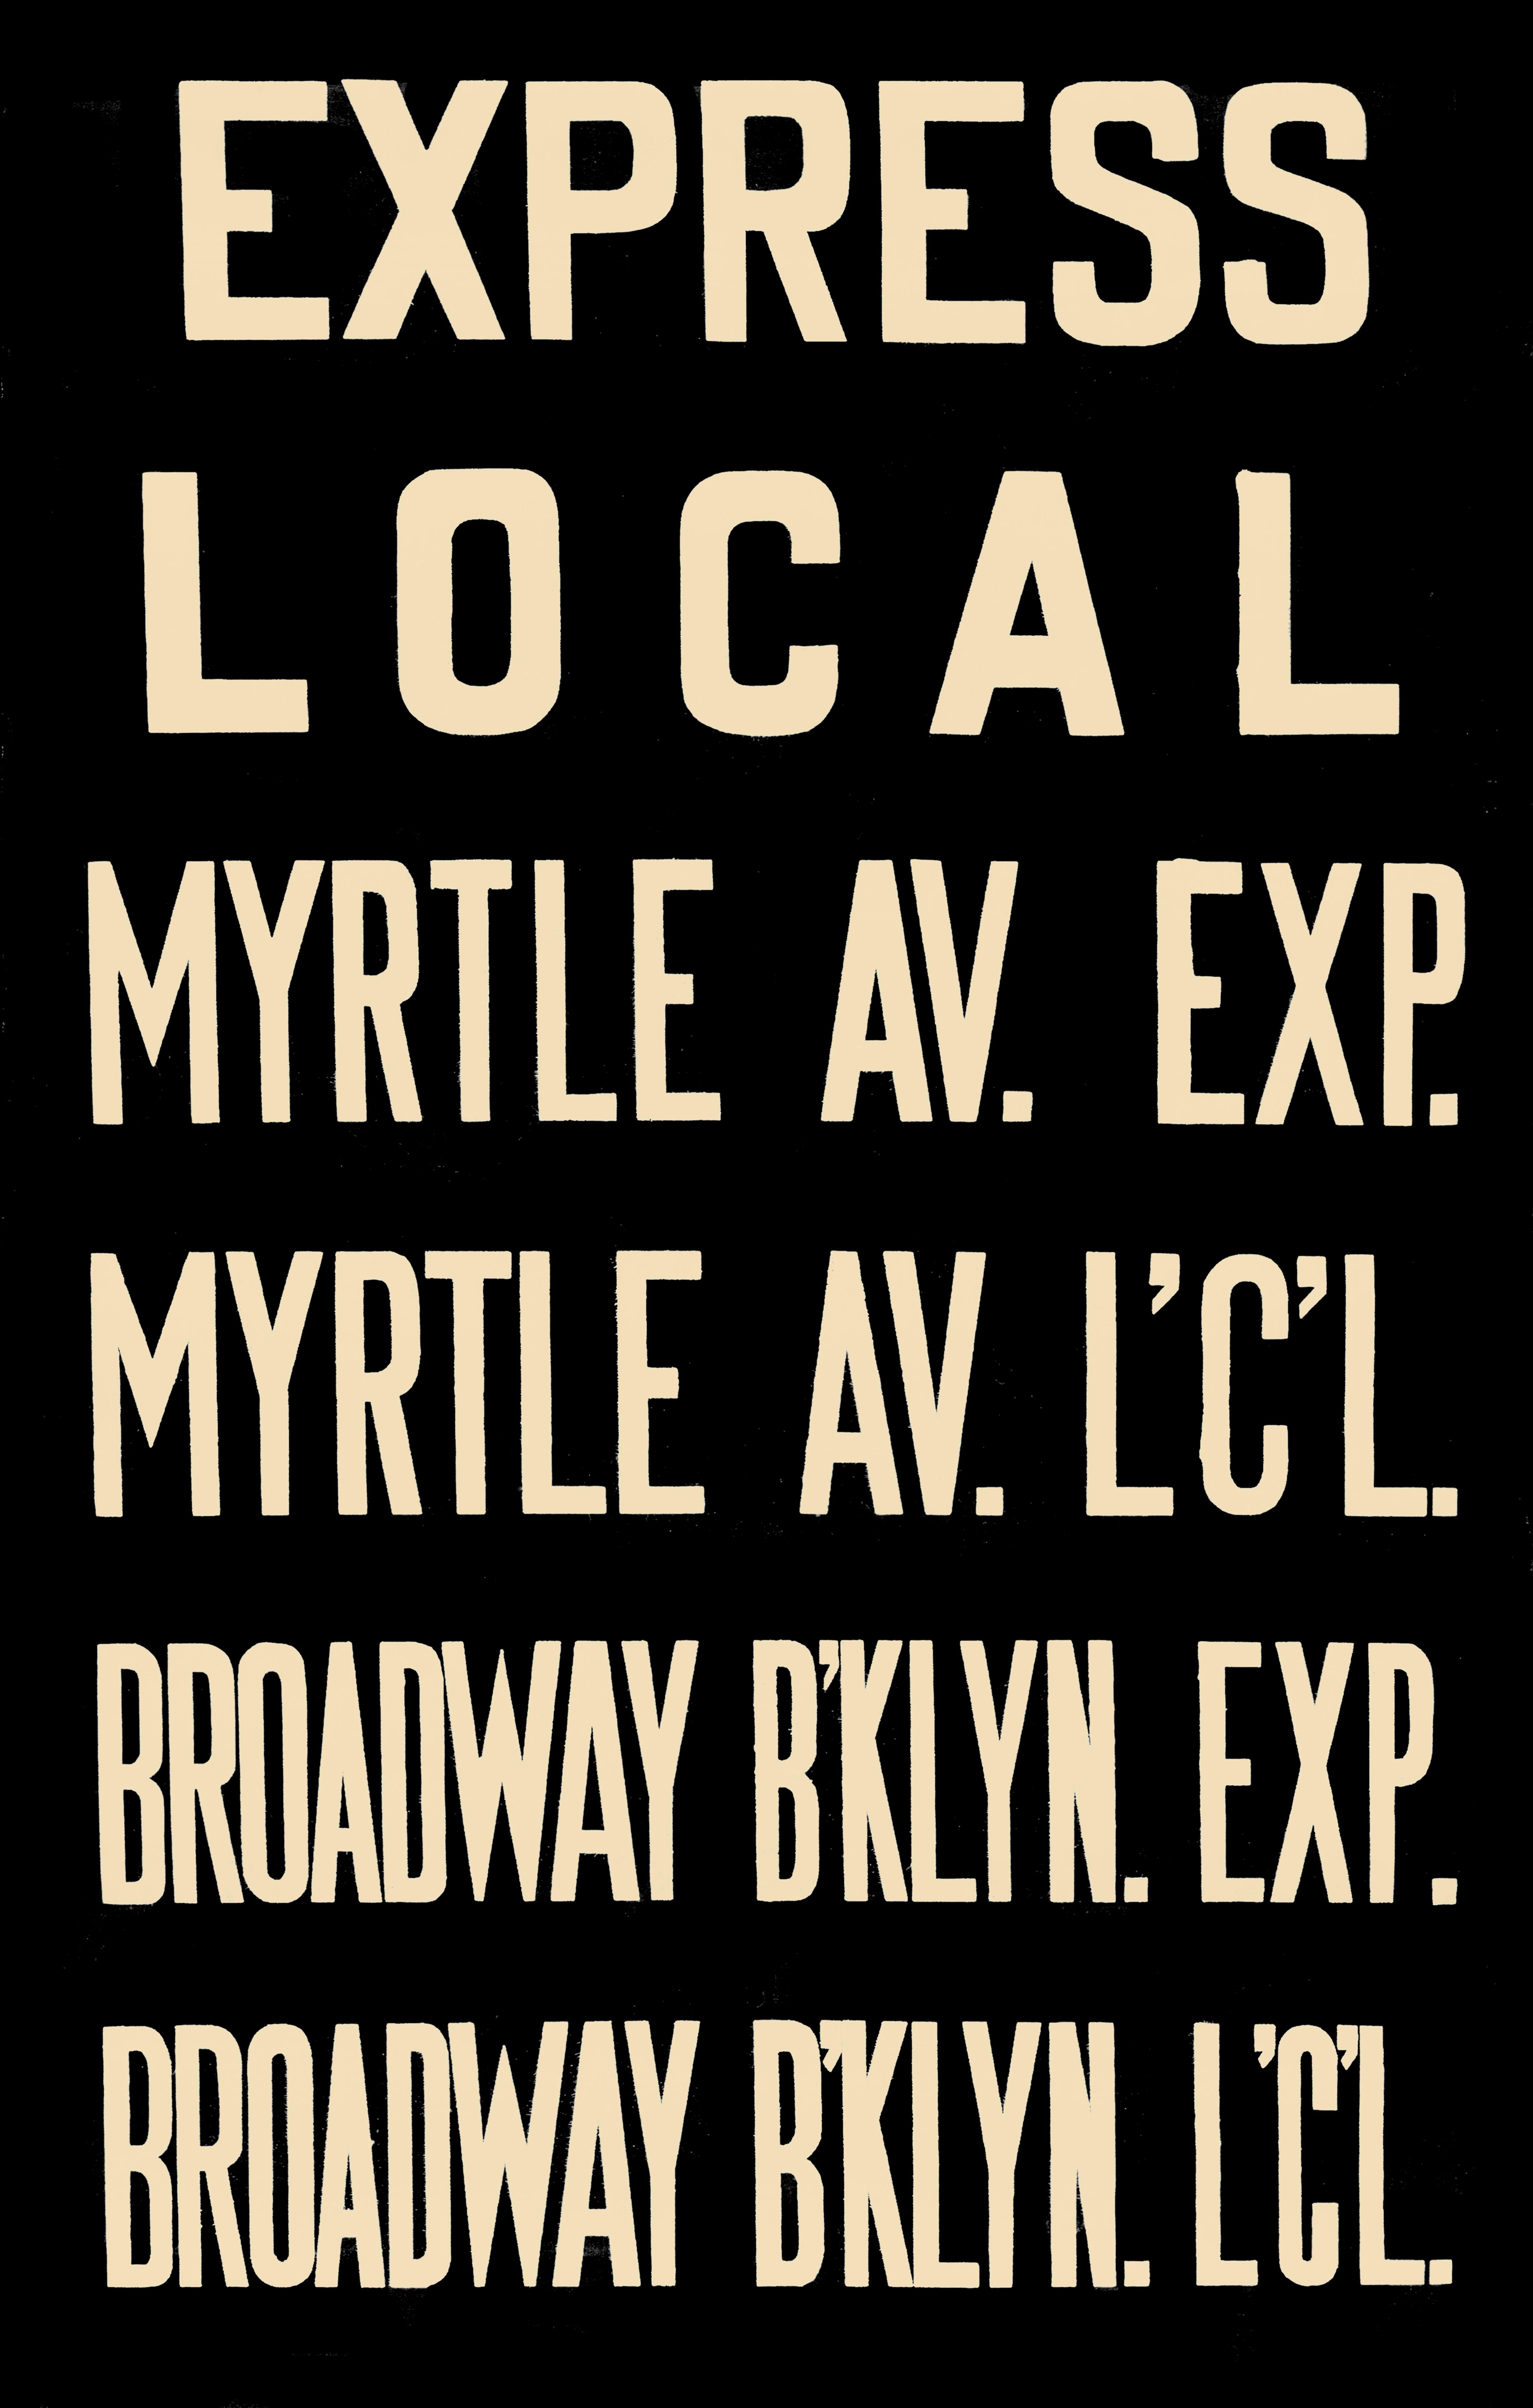 Unknown Still-Life Print - NYC subway sign - Myrtle Ave / Broadway Brooklyn